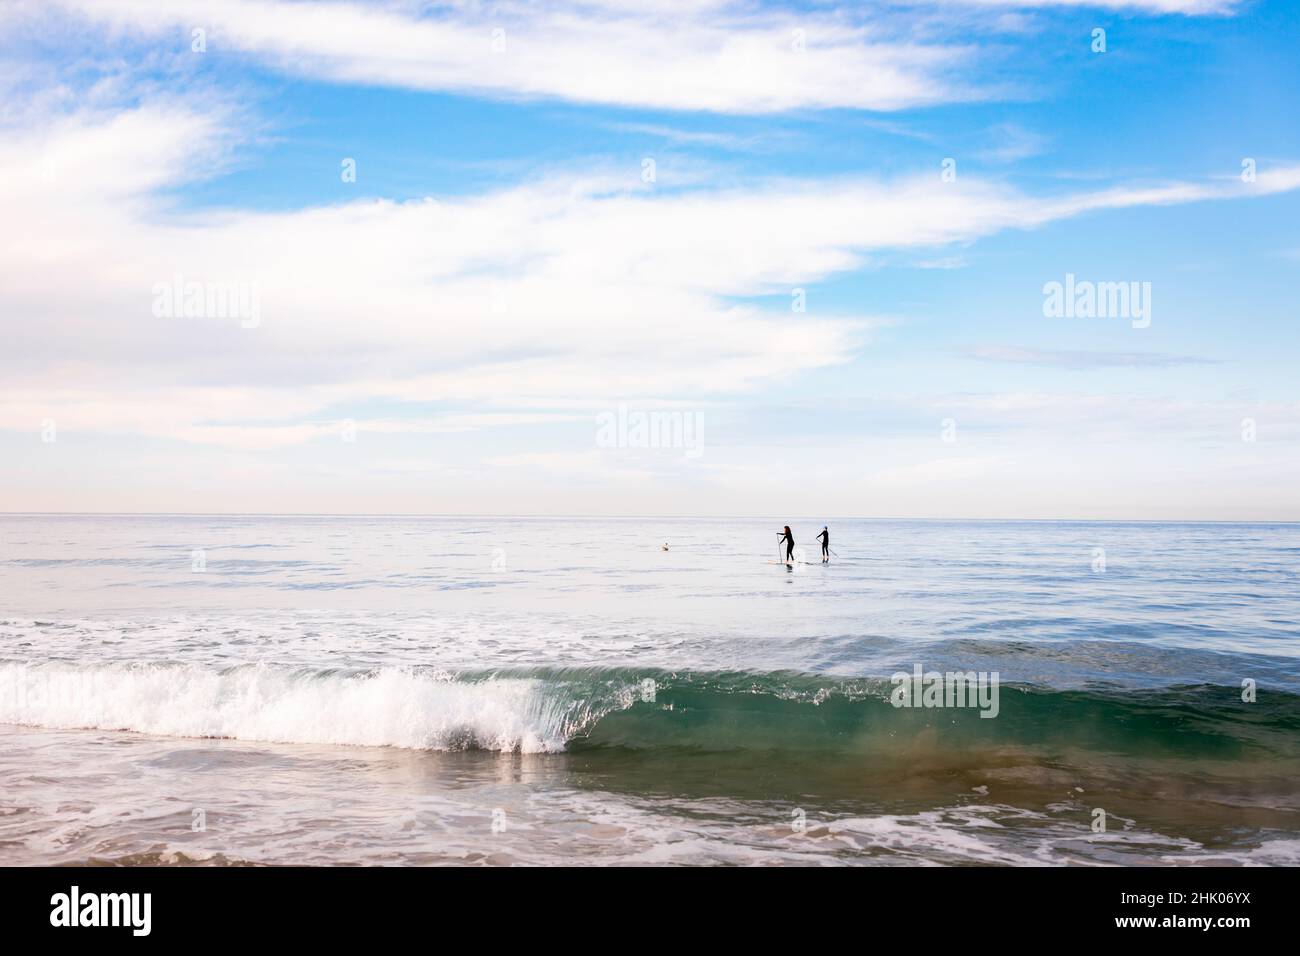 Two people on a stand up paddle board in the ocean in California. Stock Photo